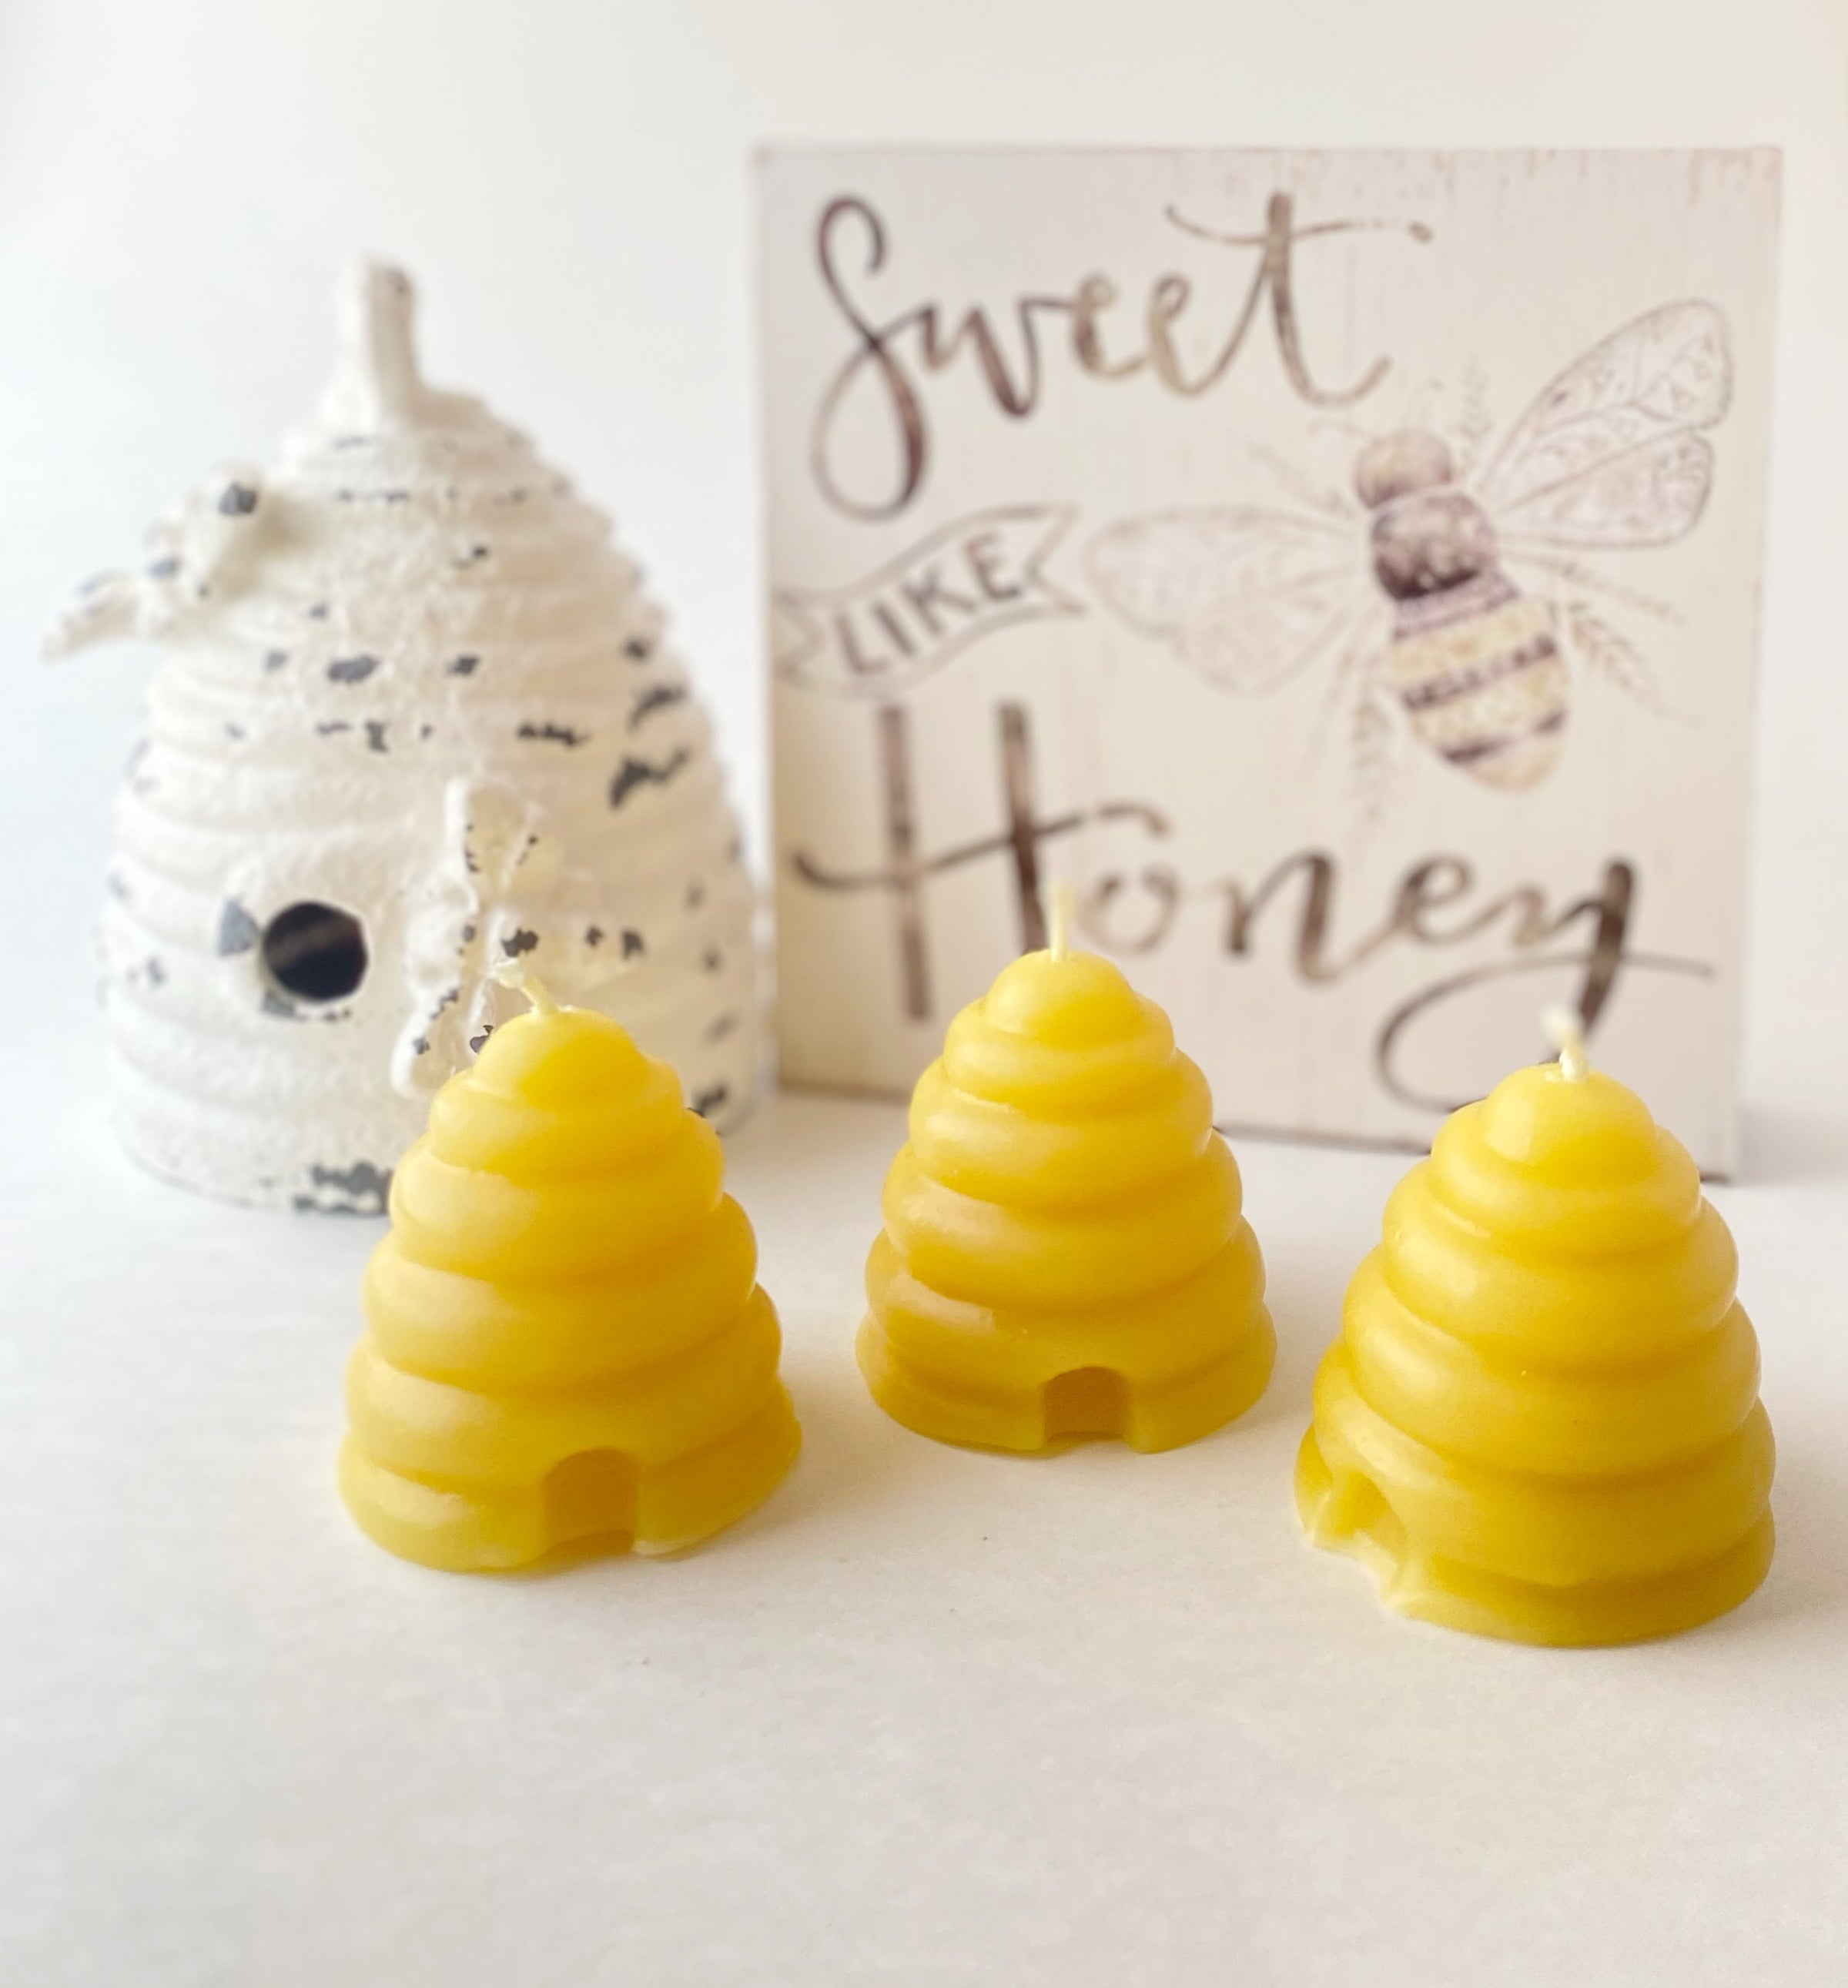  Honeybee Candle Gift Set / 100% Beeswax/Clean Burning